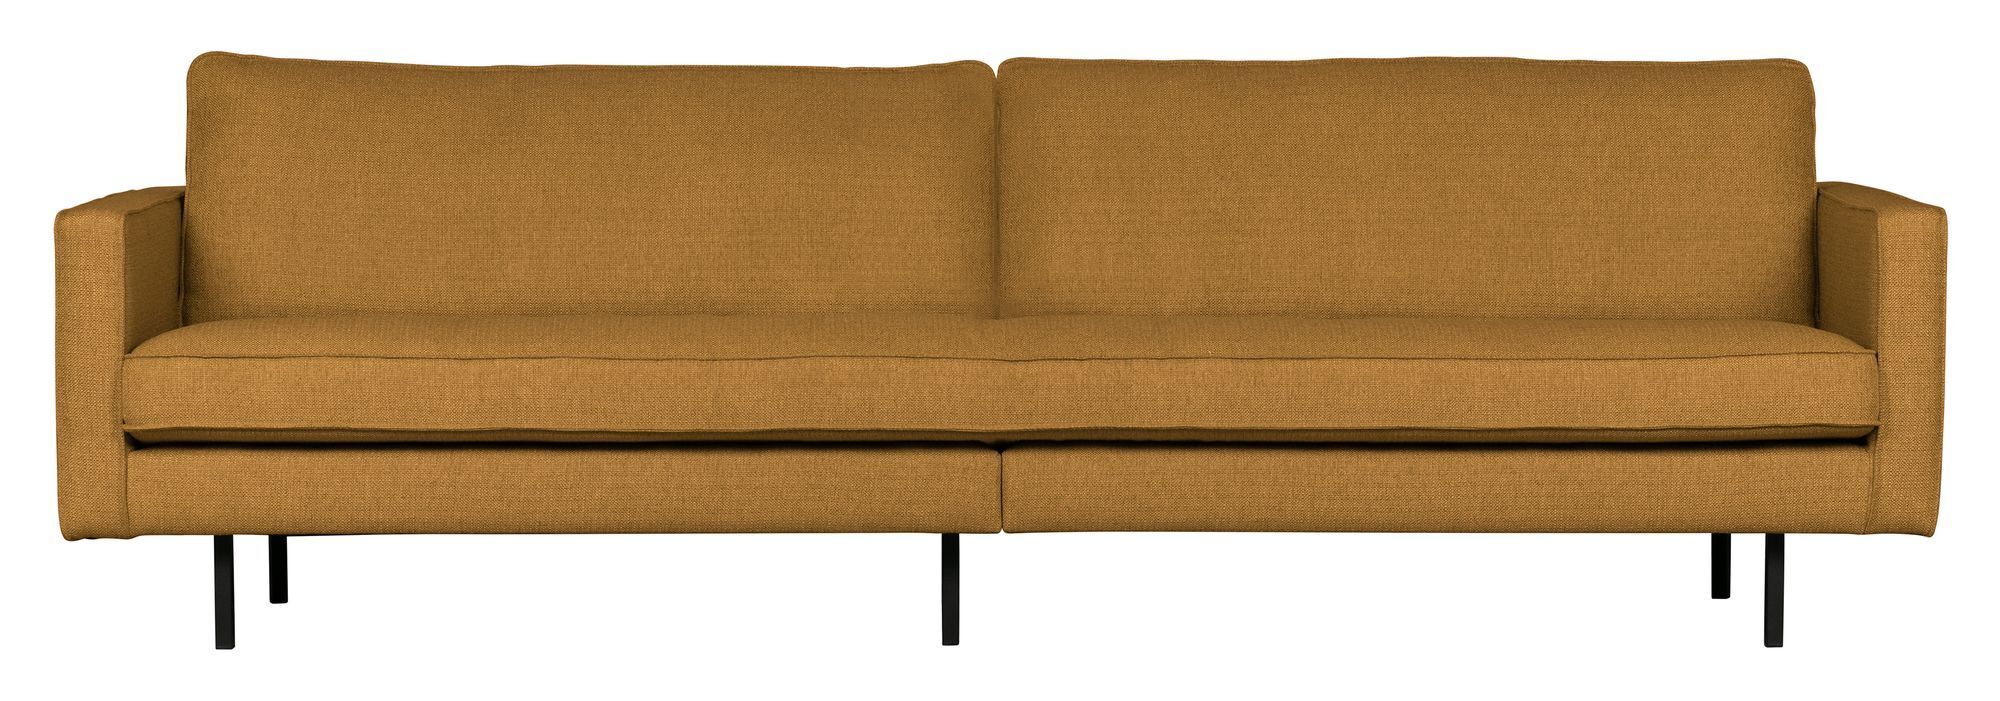 BePureHome Rodeo Stretched 3-pers. Sofa - Fudge   Unoliving